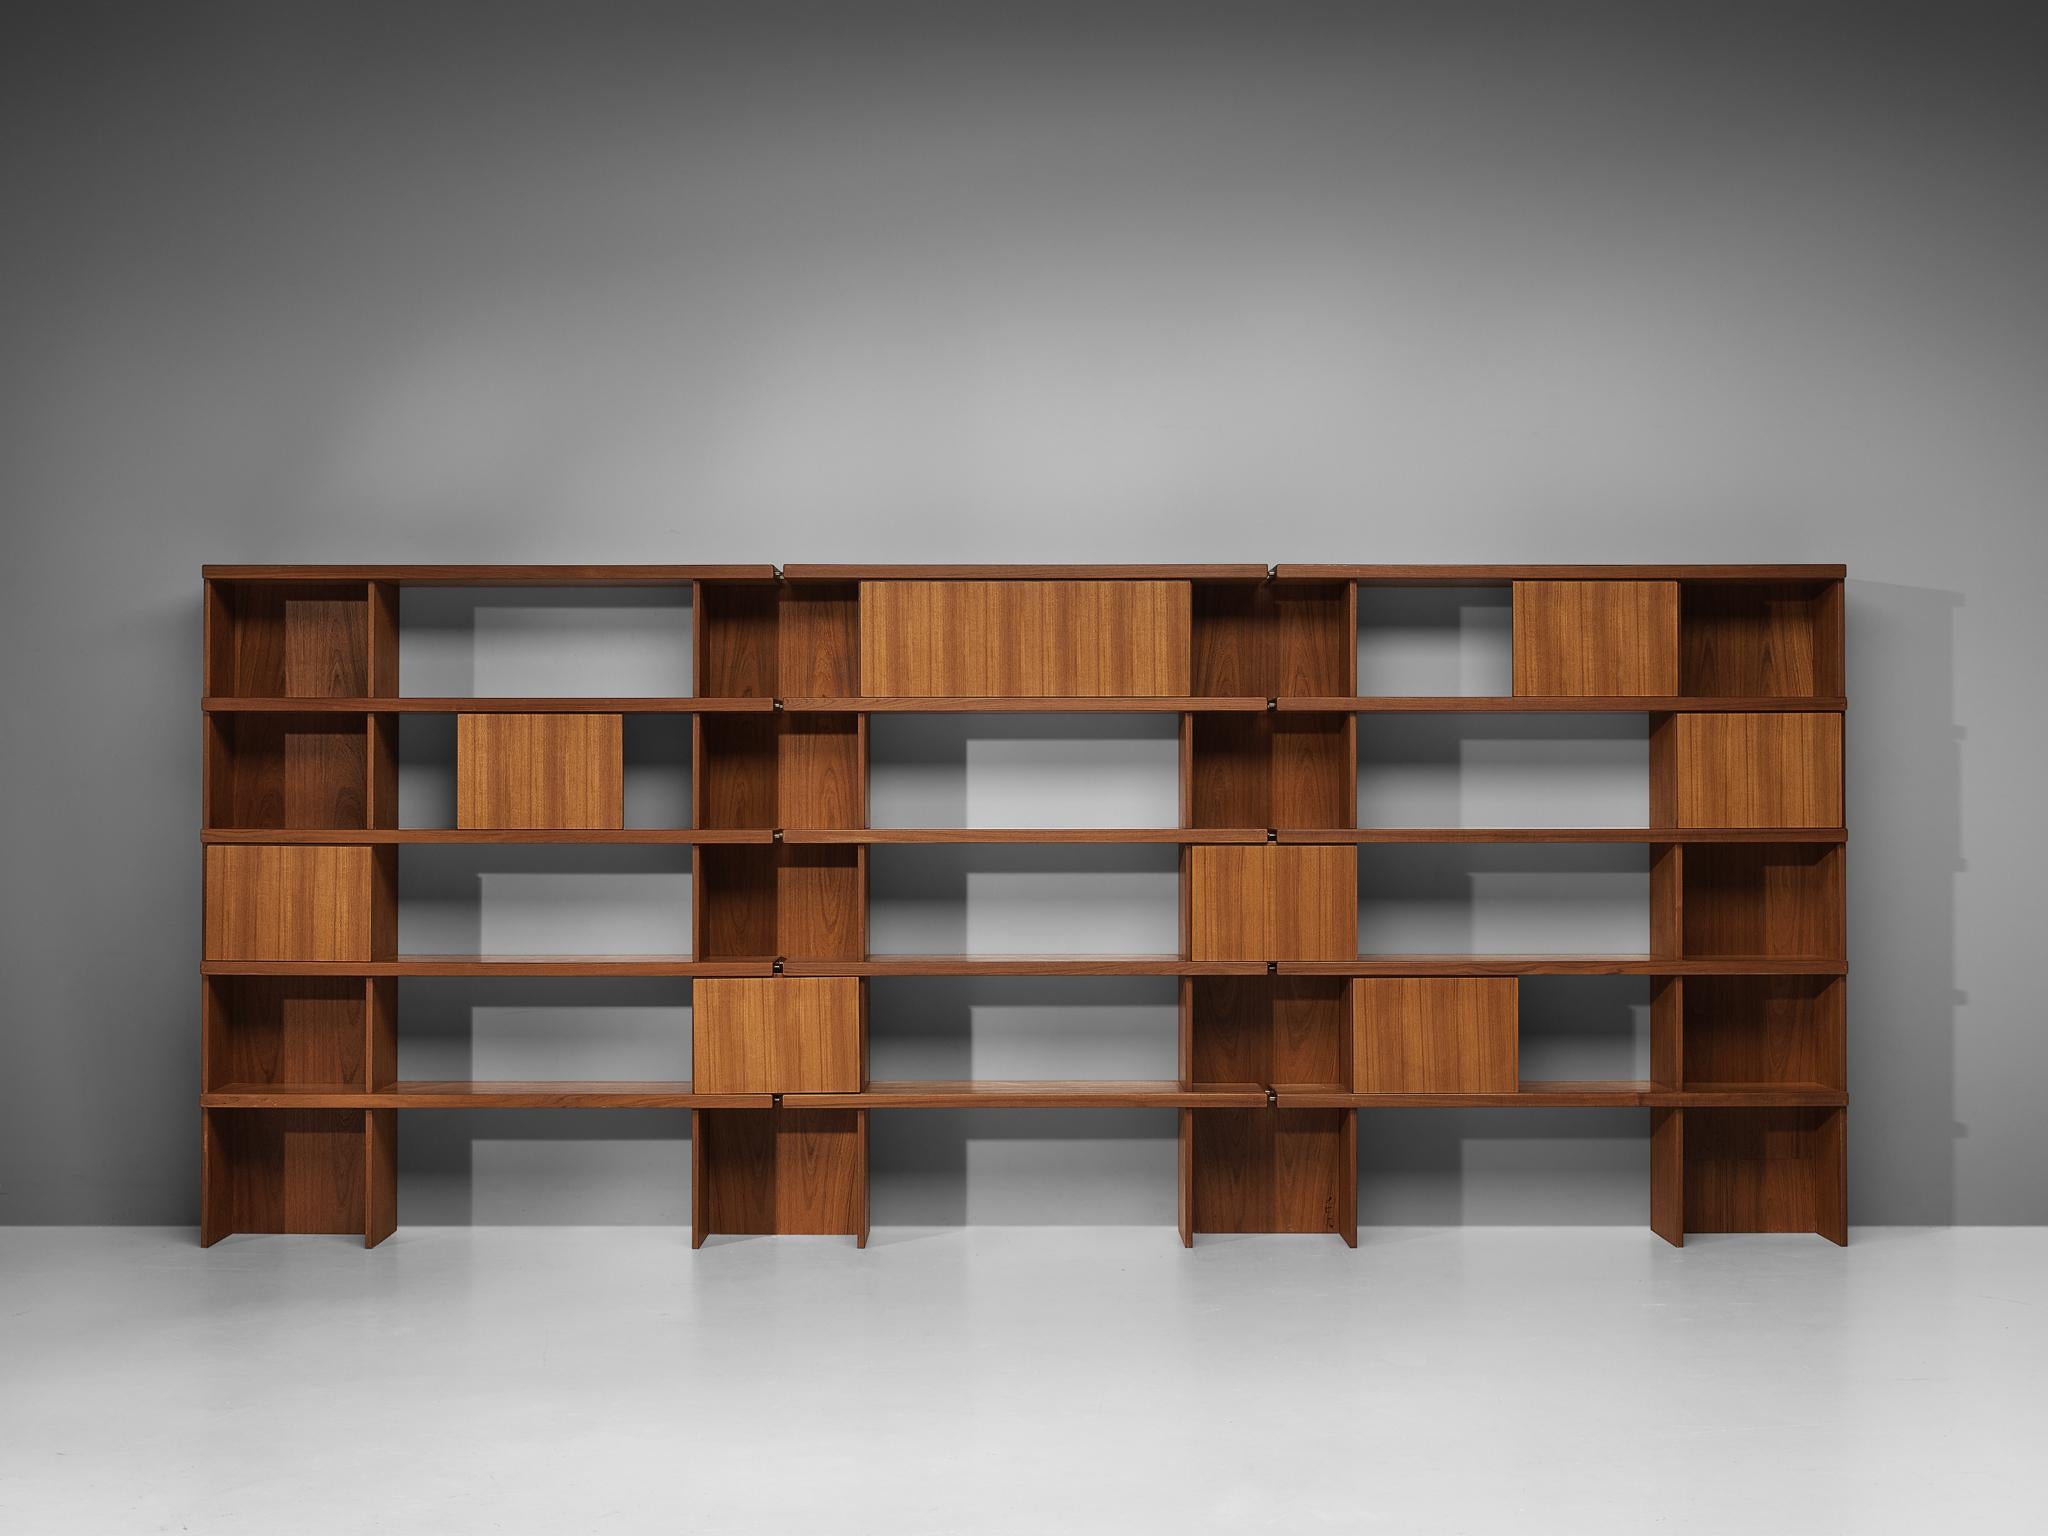 IImari Tapiovaara for Esposizione Permanente Mobili Cantù, bookcase, teak, walnut veneer, Italy, 1957

This unique bookcase executed in teak and walnut veneer was a sumbission for the Selettiva International Furniture Competition in Cantú, Italy